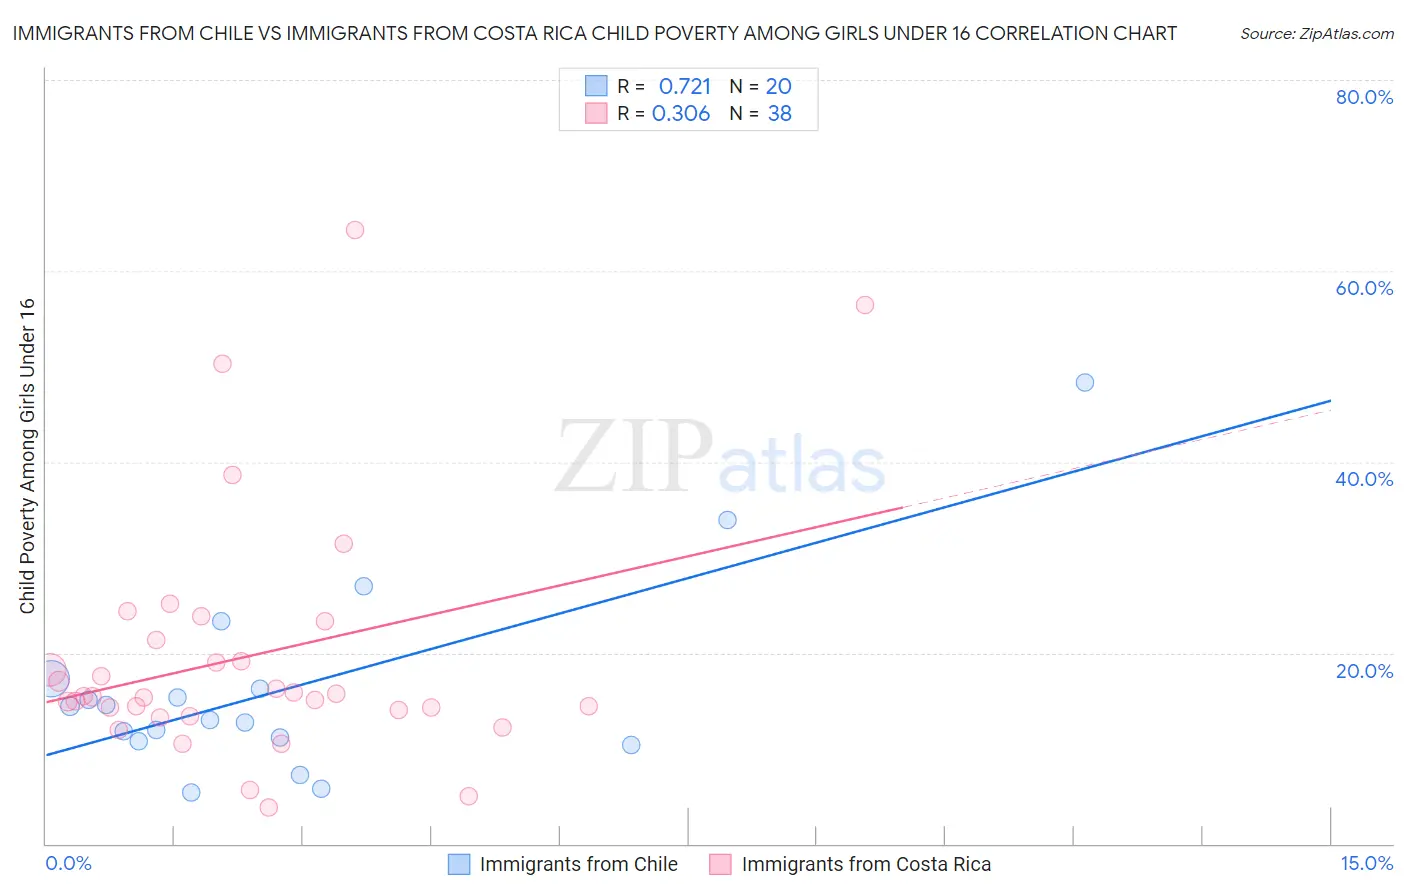 Immigrants from Chile vs Immigrants from Costa Rica Child Poverty Among Girls Under 16